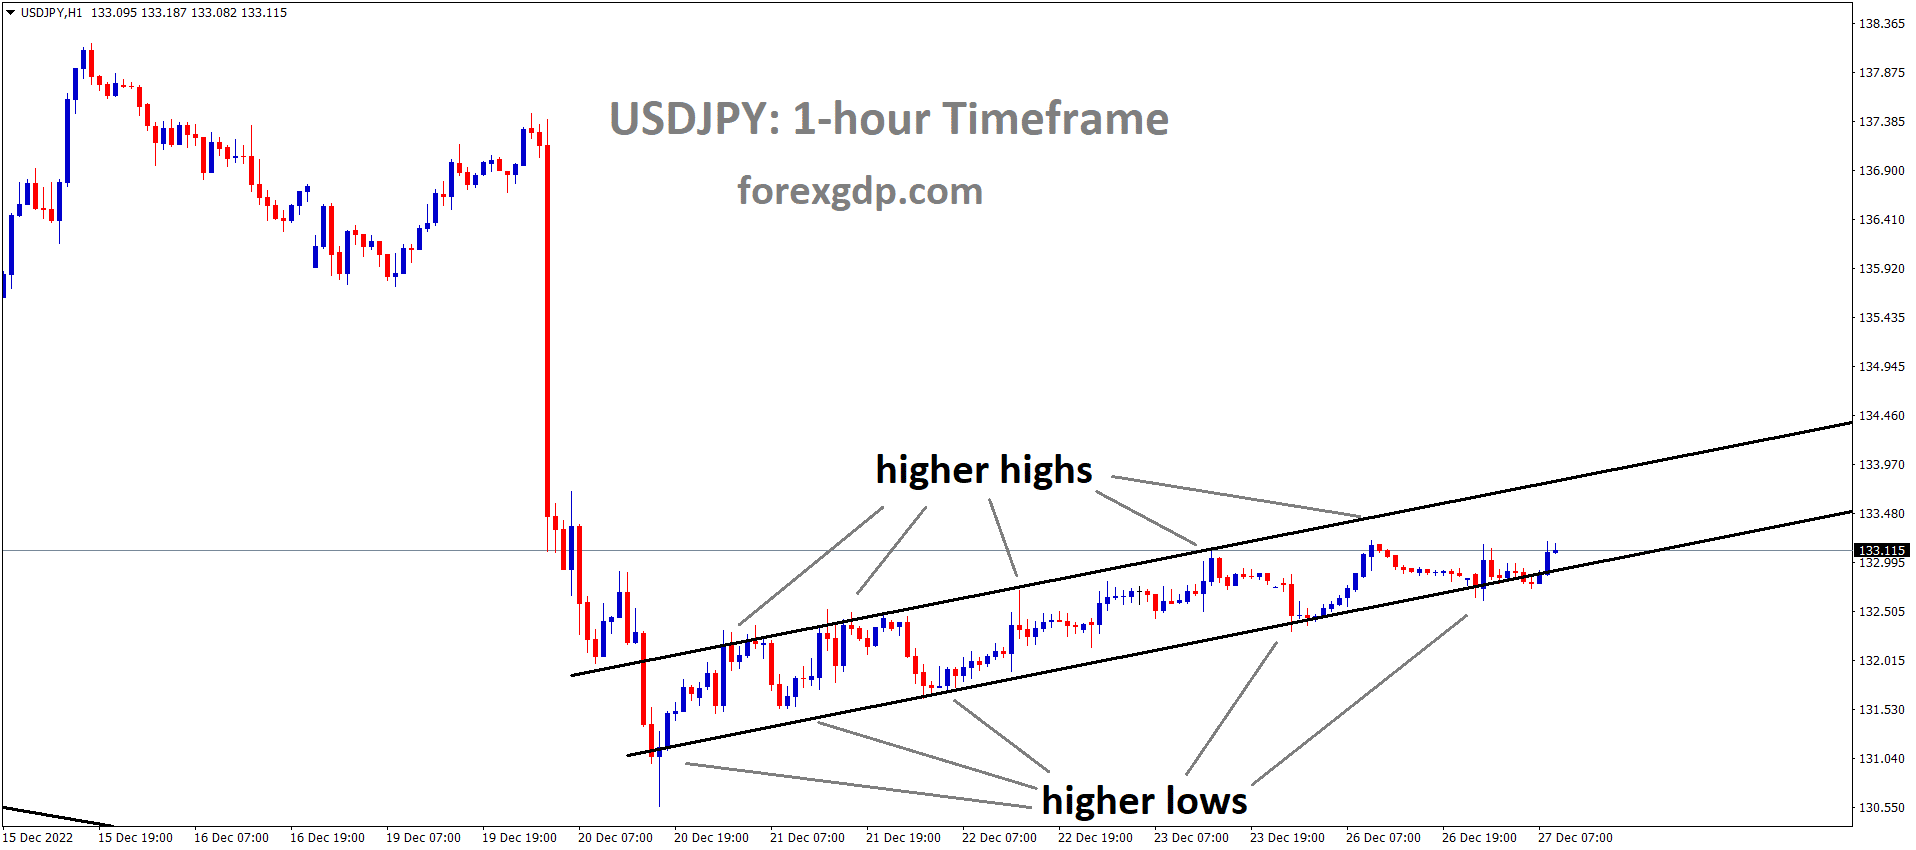 USDJPY is moving in an Ascending channel and the market has rebounded from the higher low area of the channel 1